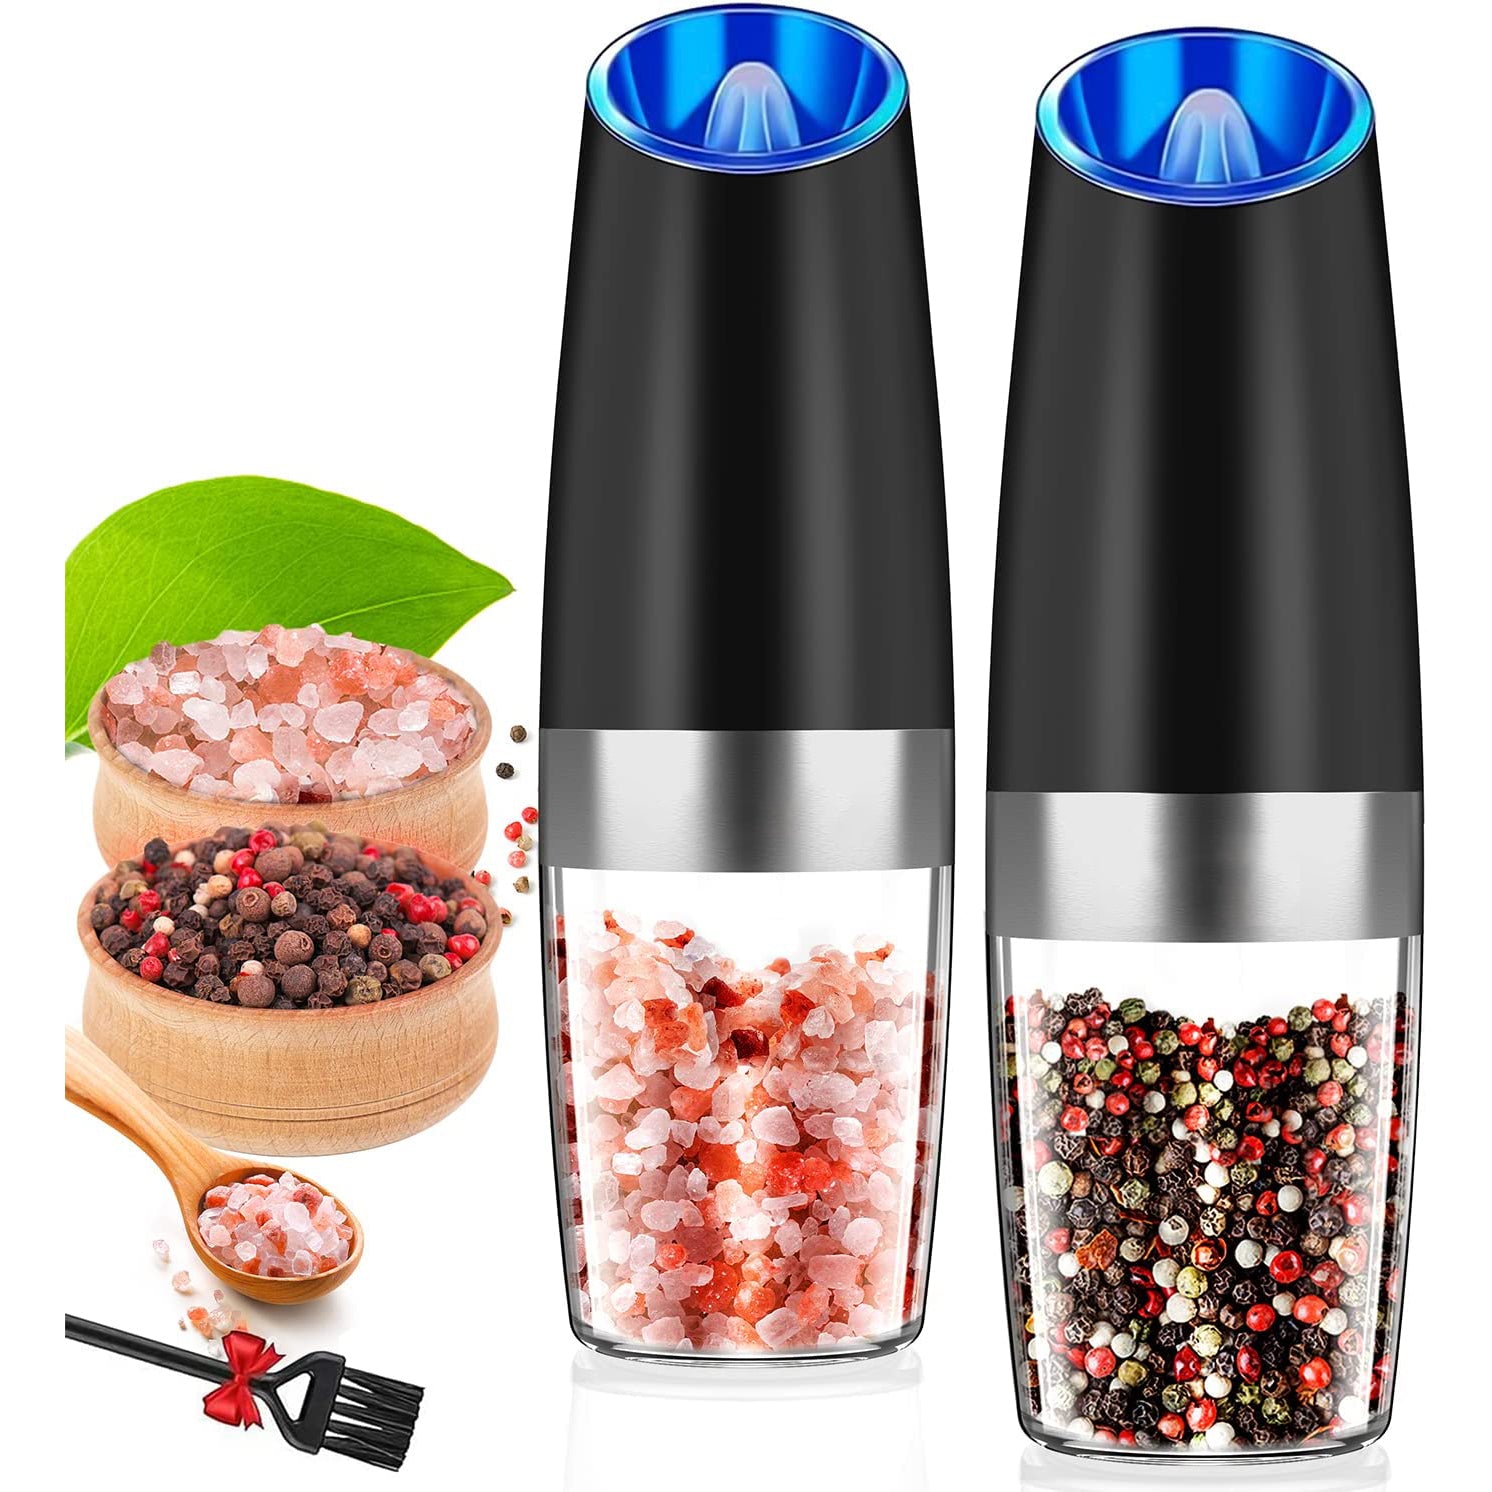 2X Electric Pepper Salt Grinder Mill Operated LED Light Battery Automatic